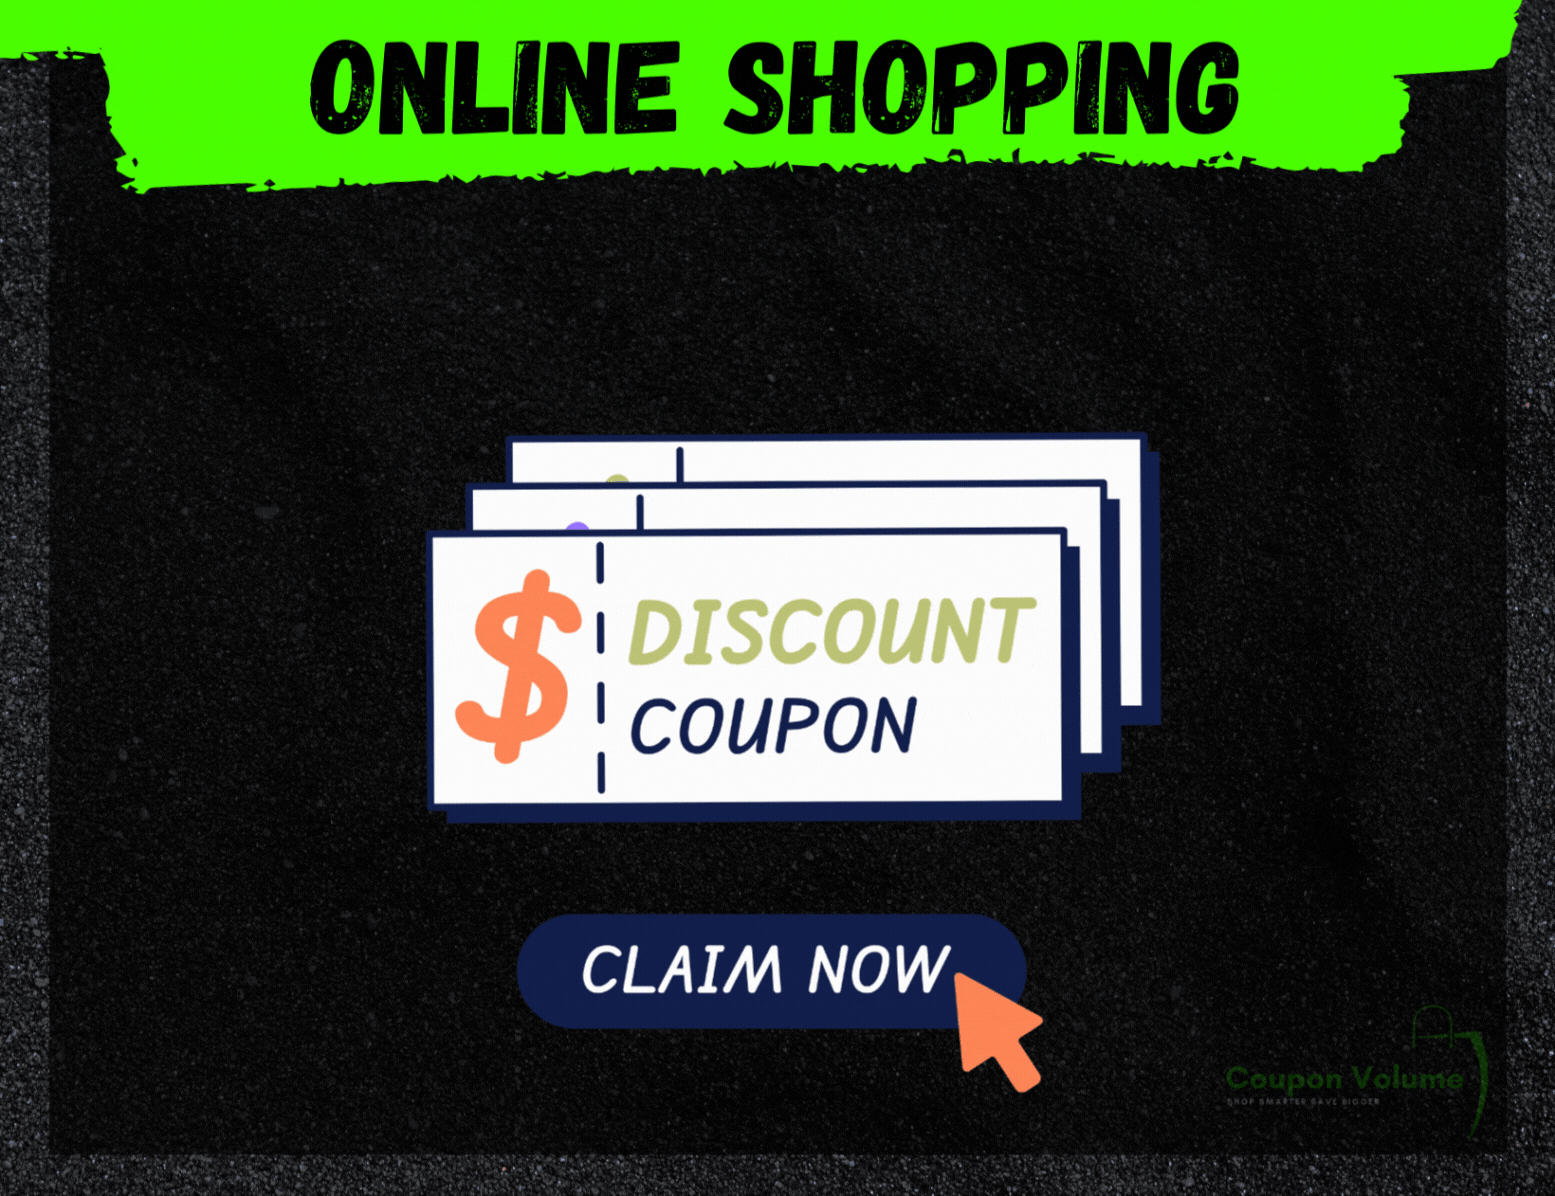 June 2024 Coupon Codes Hongkong- What Brands Have in Store coupon codes in hk coupon codes in hongkong offers in hk promo codes in hk